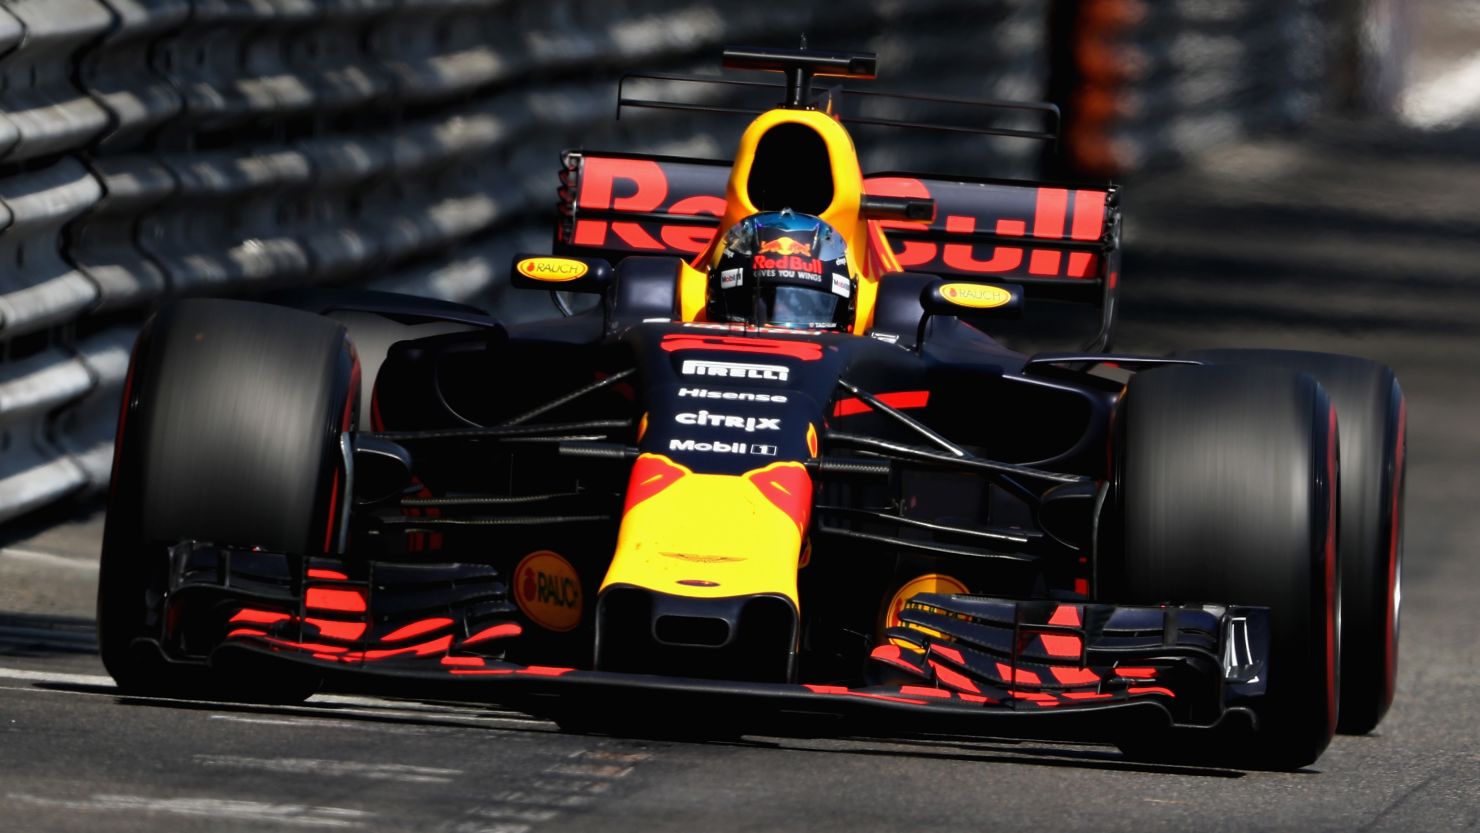 Aston Martin's wings logo has adorned the nose of Red Bull F1 cars since 2016.